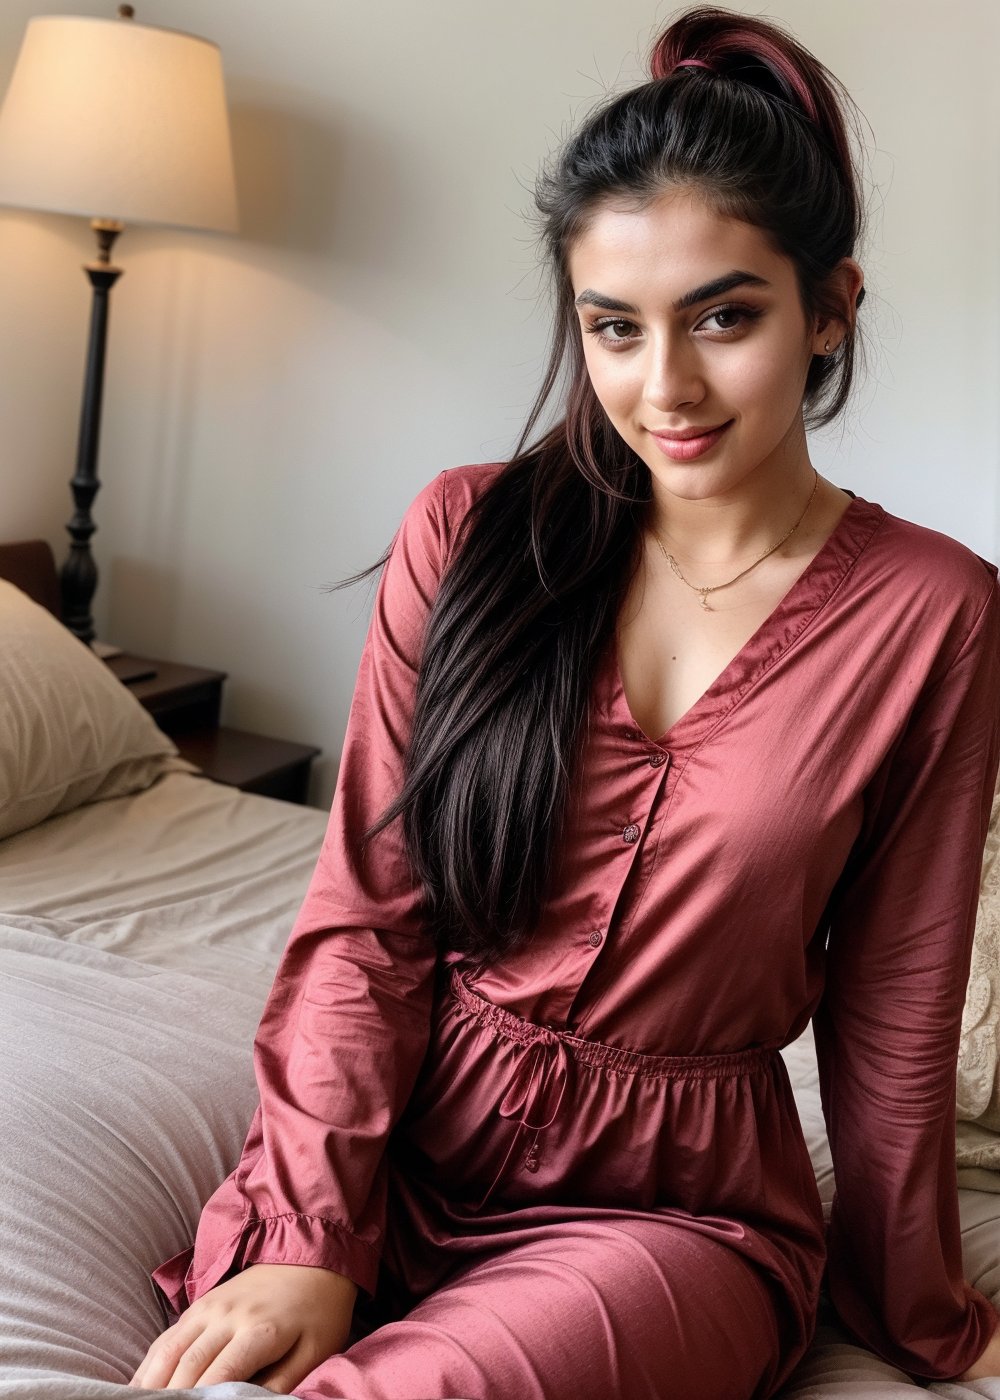  beautiful cute young attractive girl 22 year old, cute, instagram model, long black hair, black eyes, sitting on bed in bed room at home, full_body, full confident, exotic beauty, full of attitude, wearing red colour french nightdress, pony_tail, feeling happy, no makeup, simple look.
